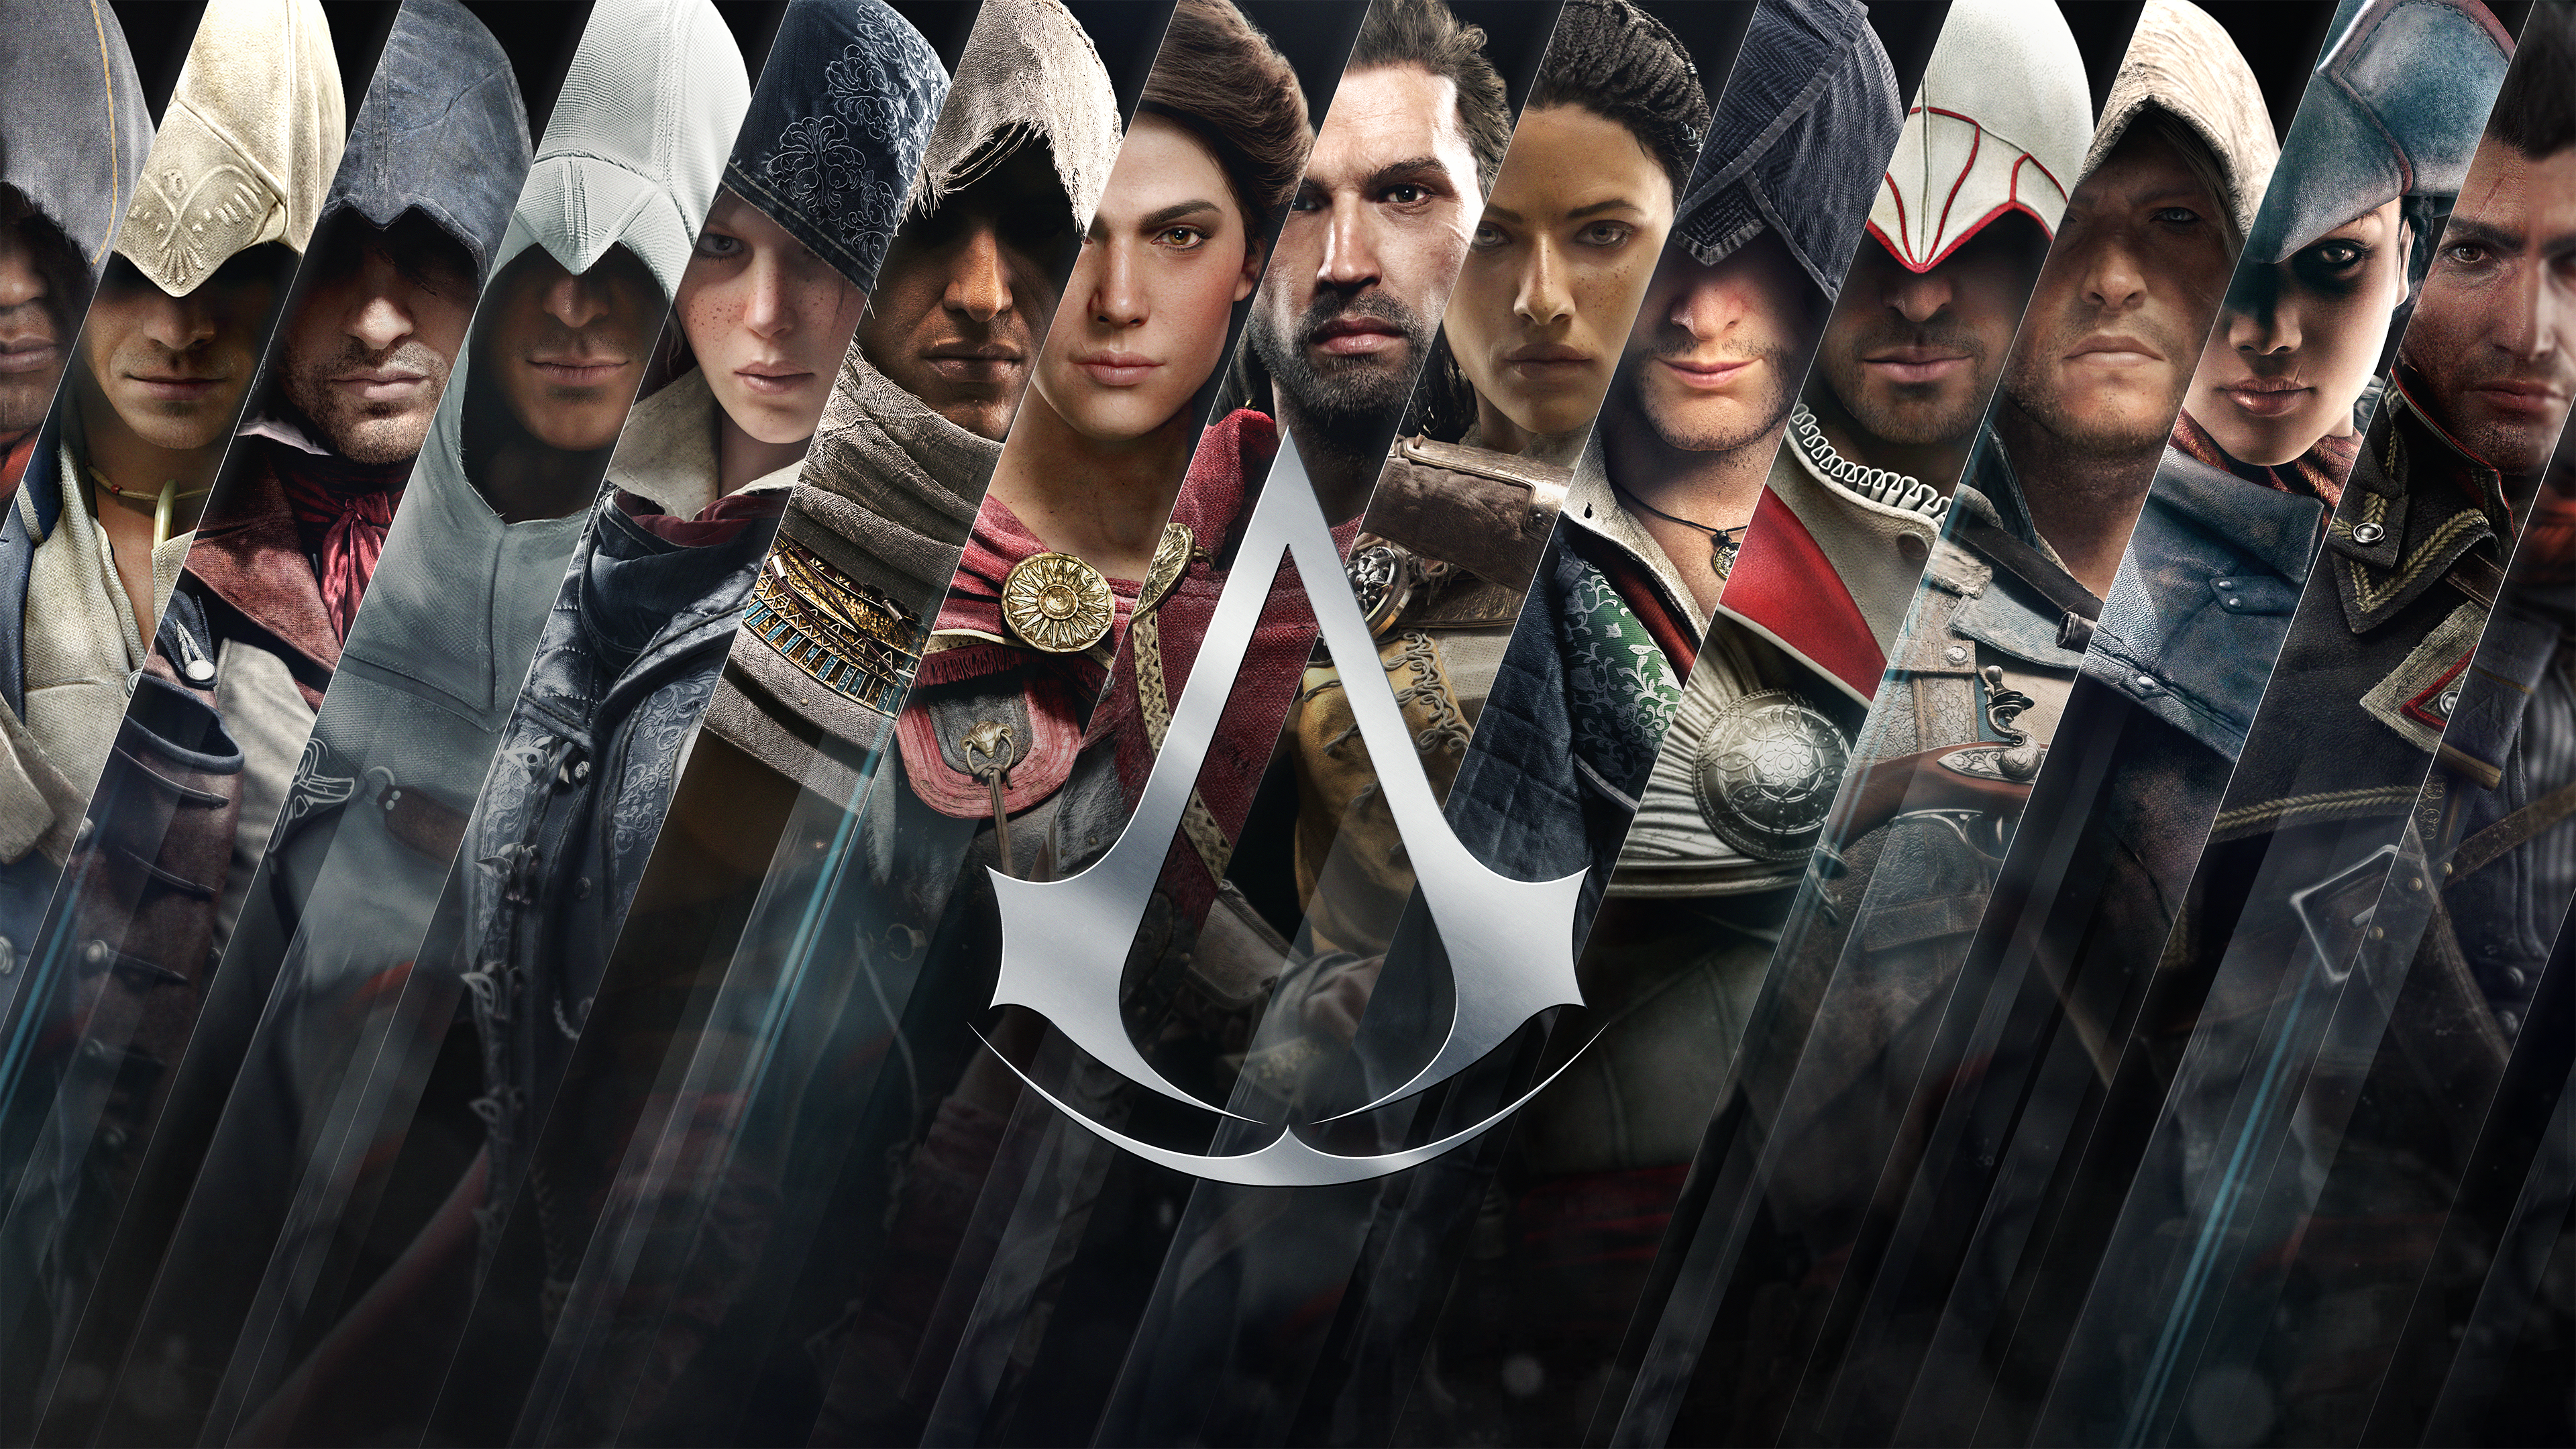 Video Game Assassin's Creed HD Wallpaper | Background Image